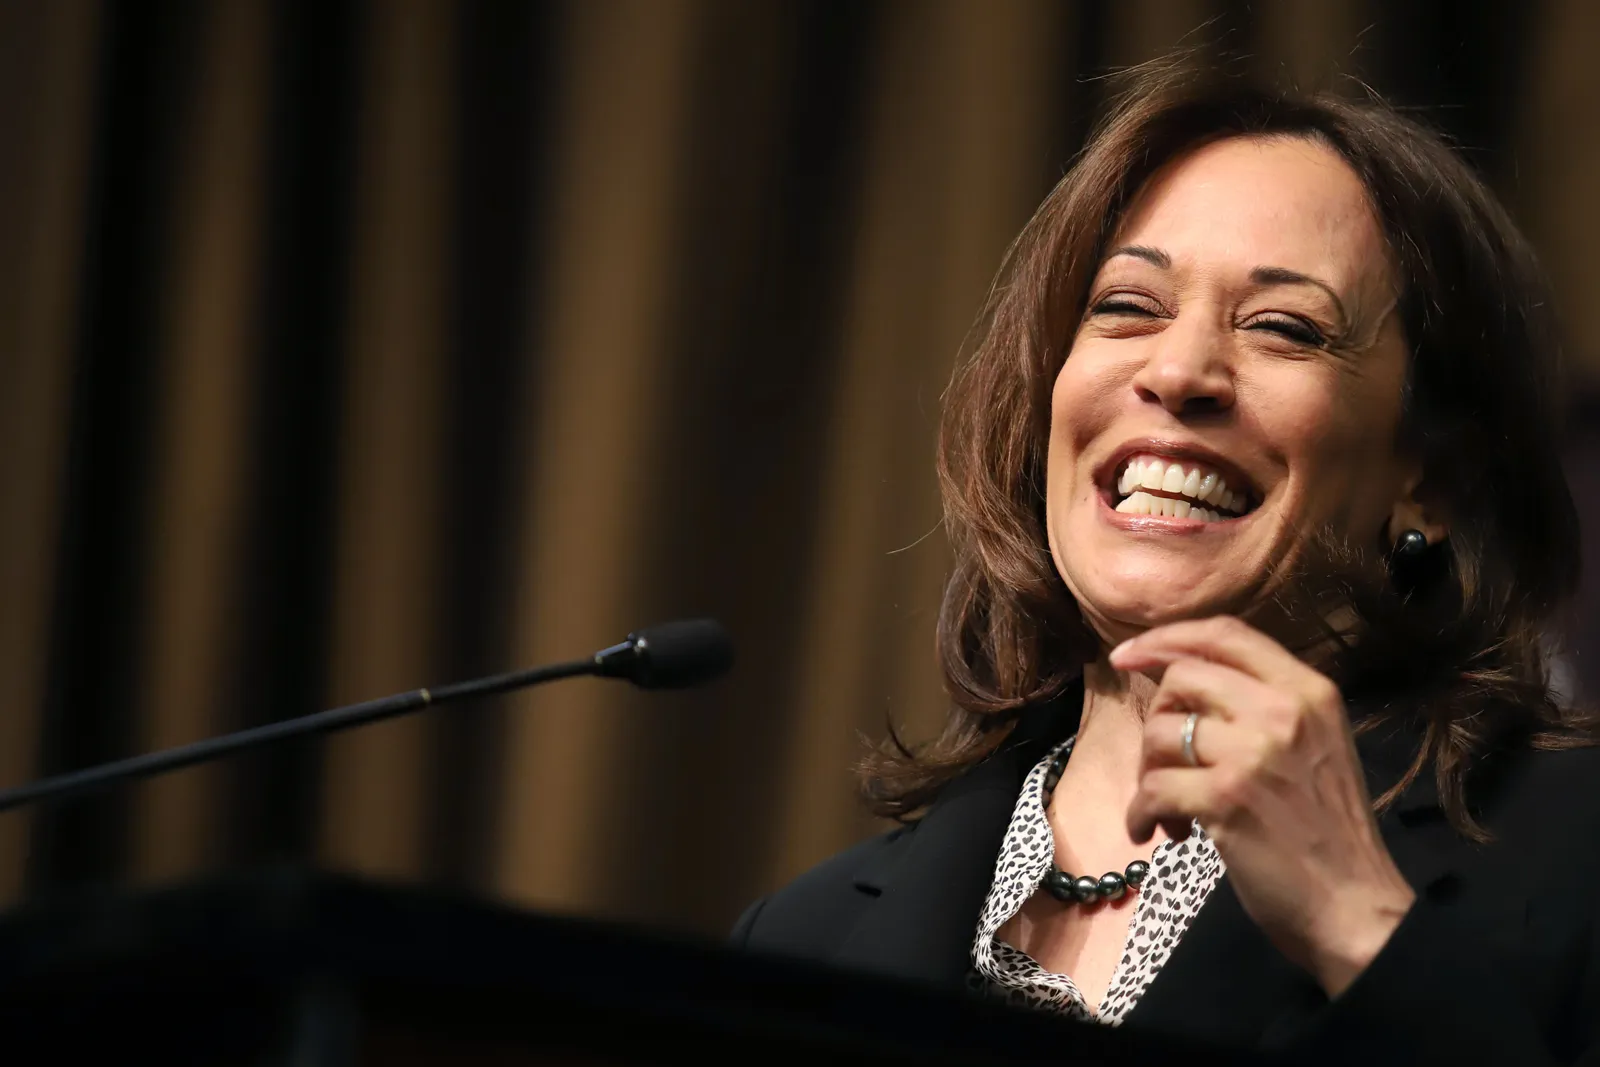 Harris Pushes Back on Critics of Her Laughter